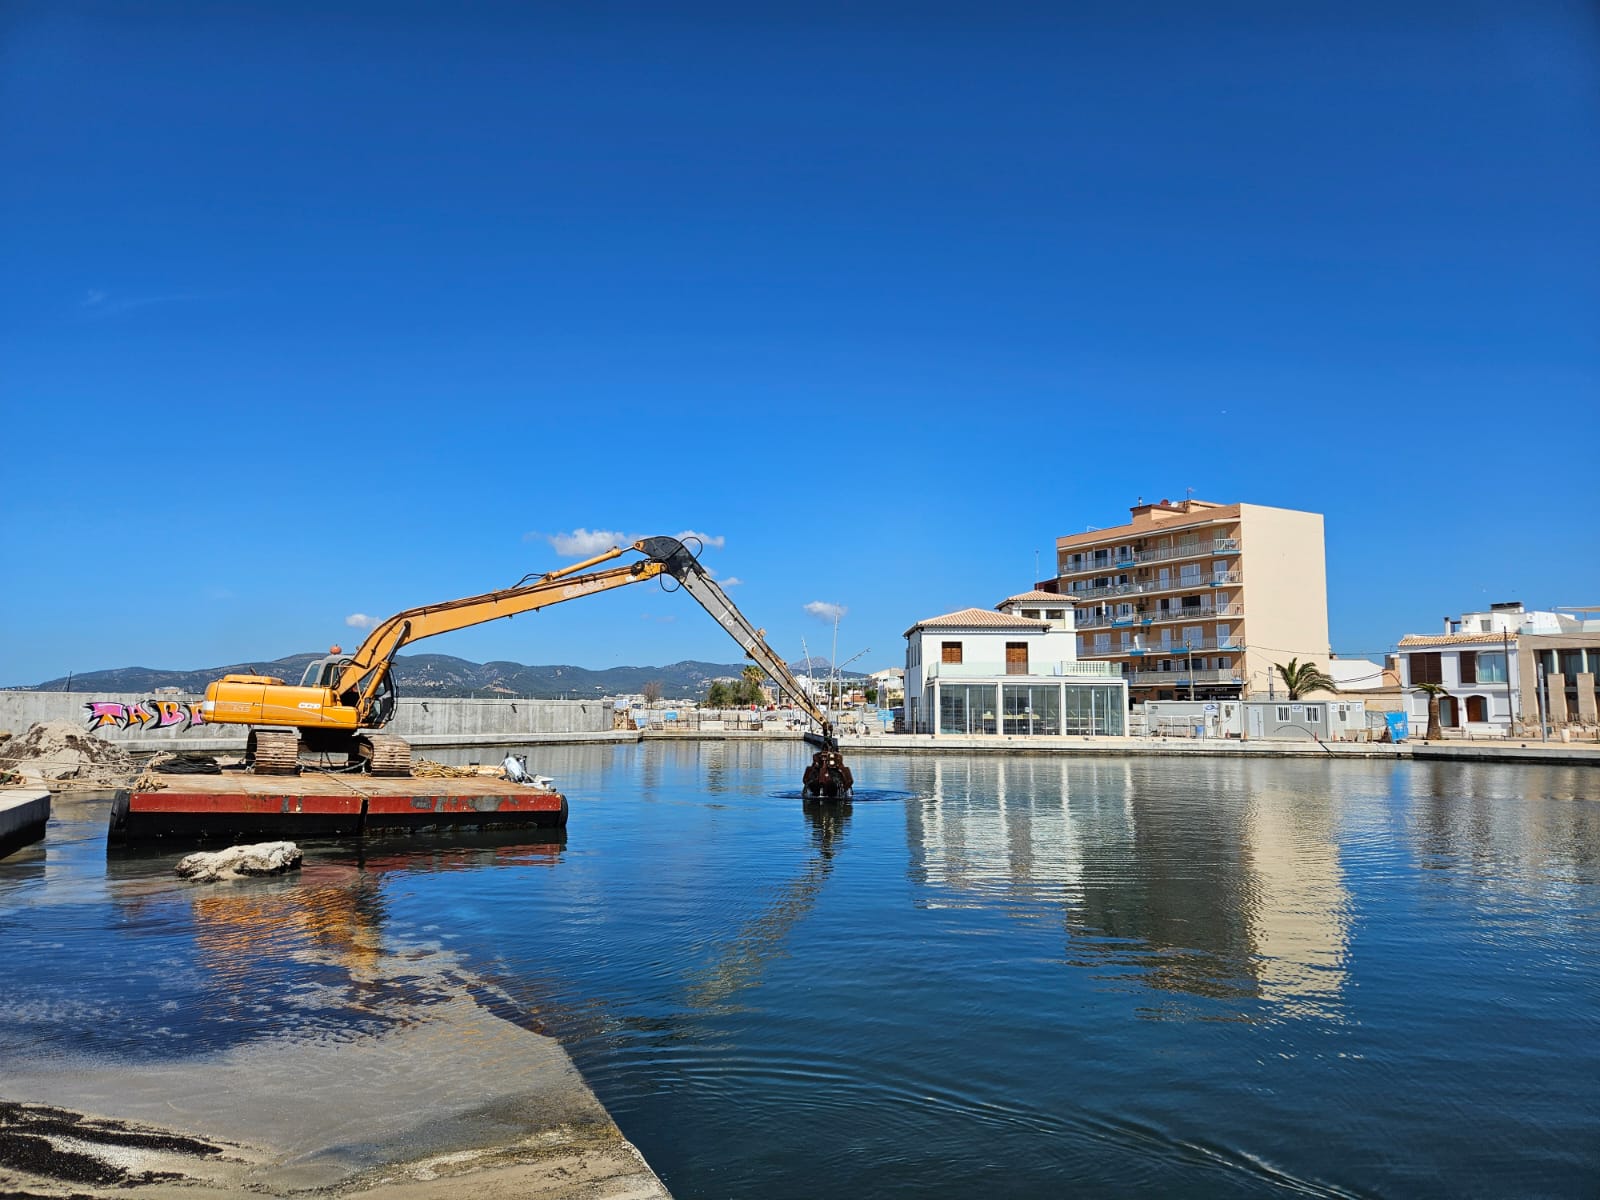 The APB begins seabed cleaning at the Molinar dock in the Port of Palma